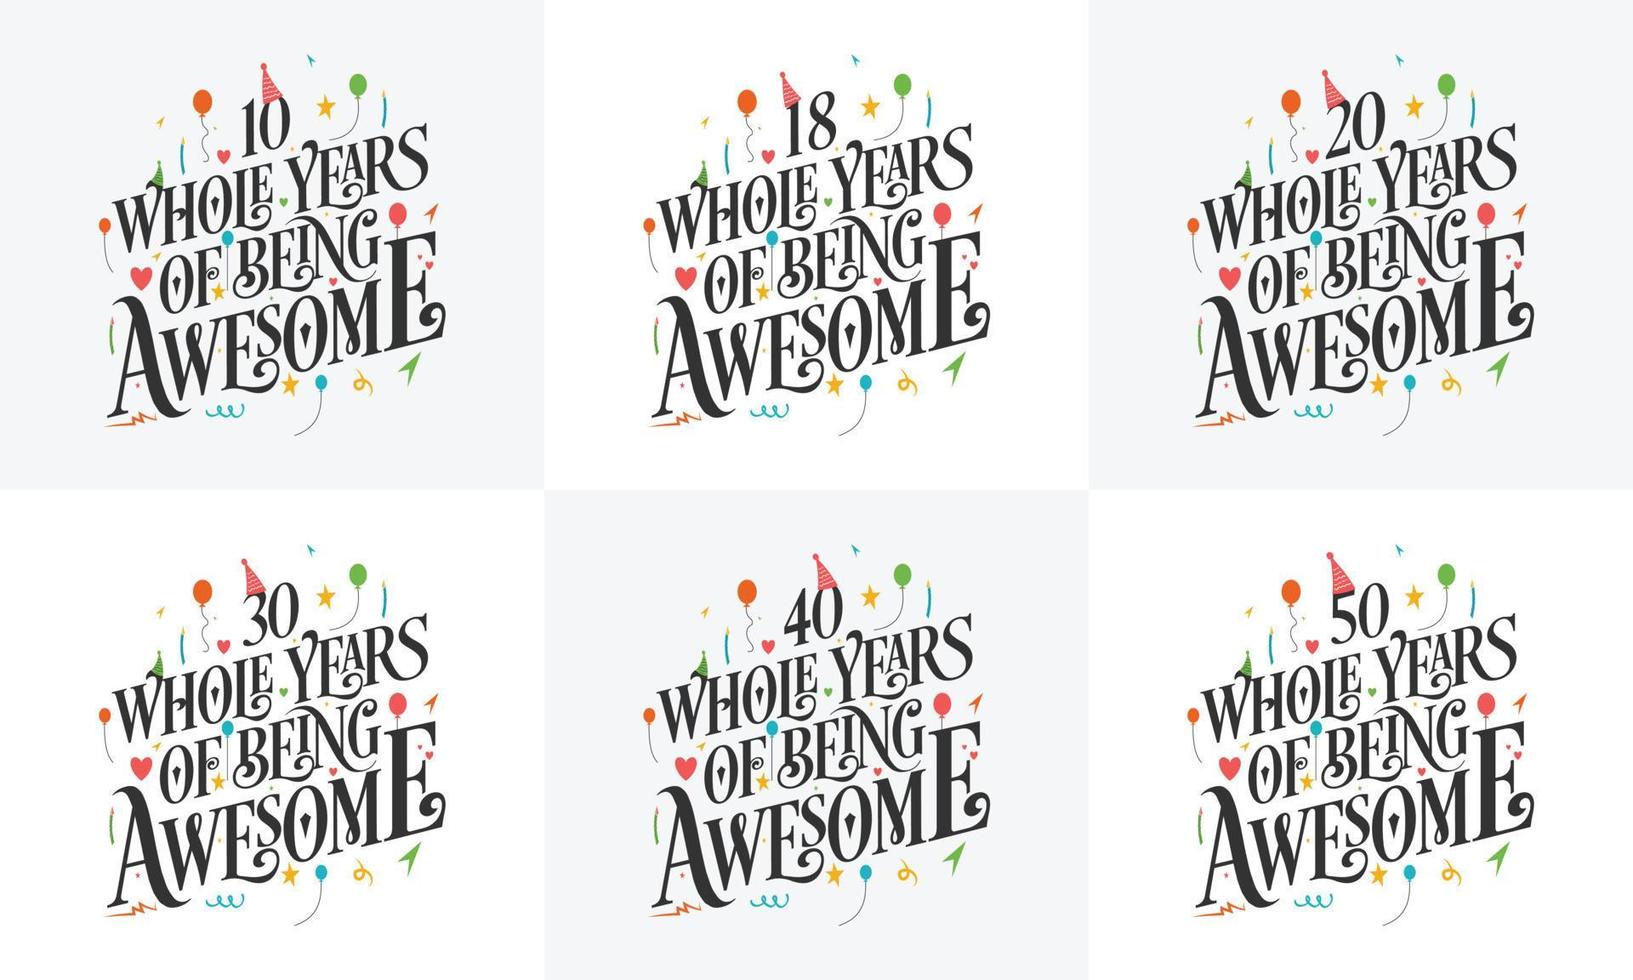 Happy Birthday design set. Best Birthday Typography quote design bundle 10, 18, 20, 30, 40, 50 Whole Years Of Being Awesome. vector